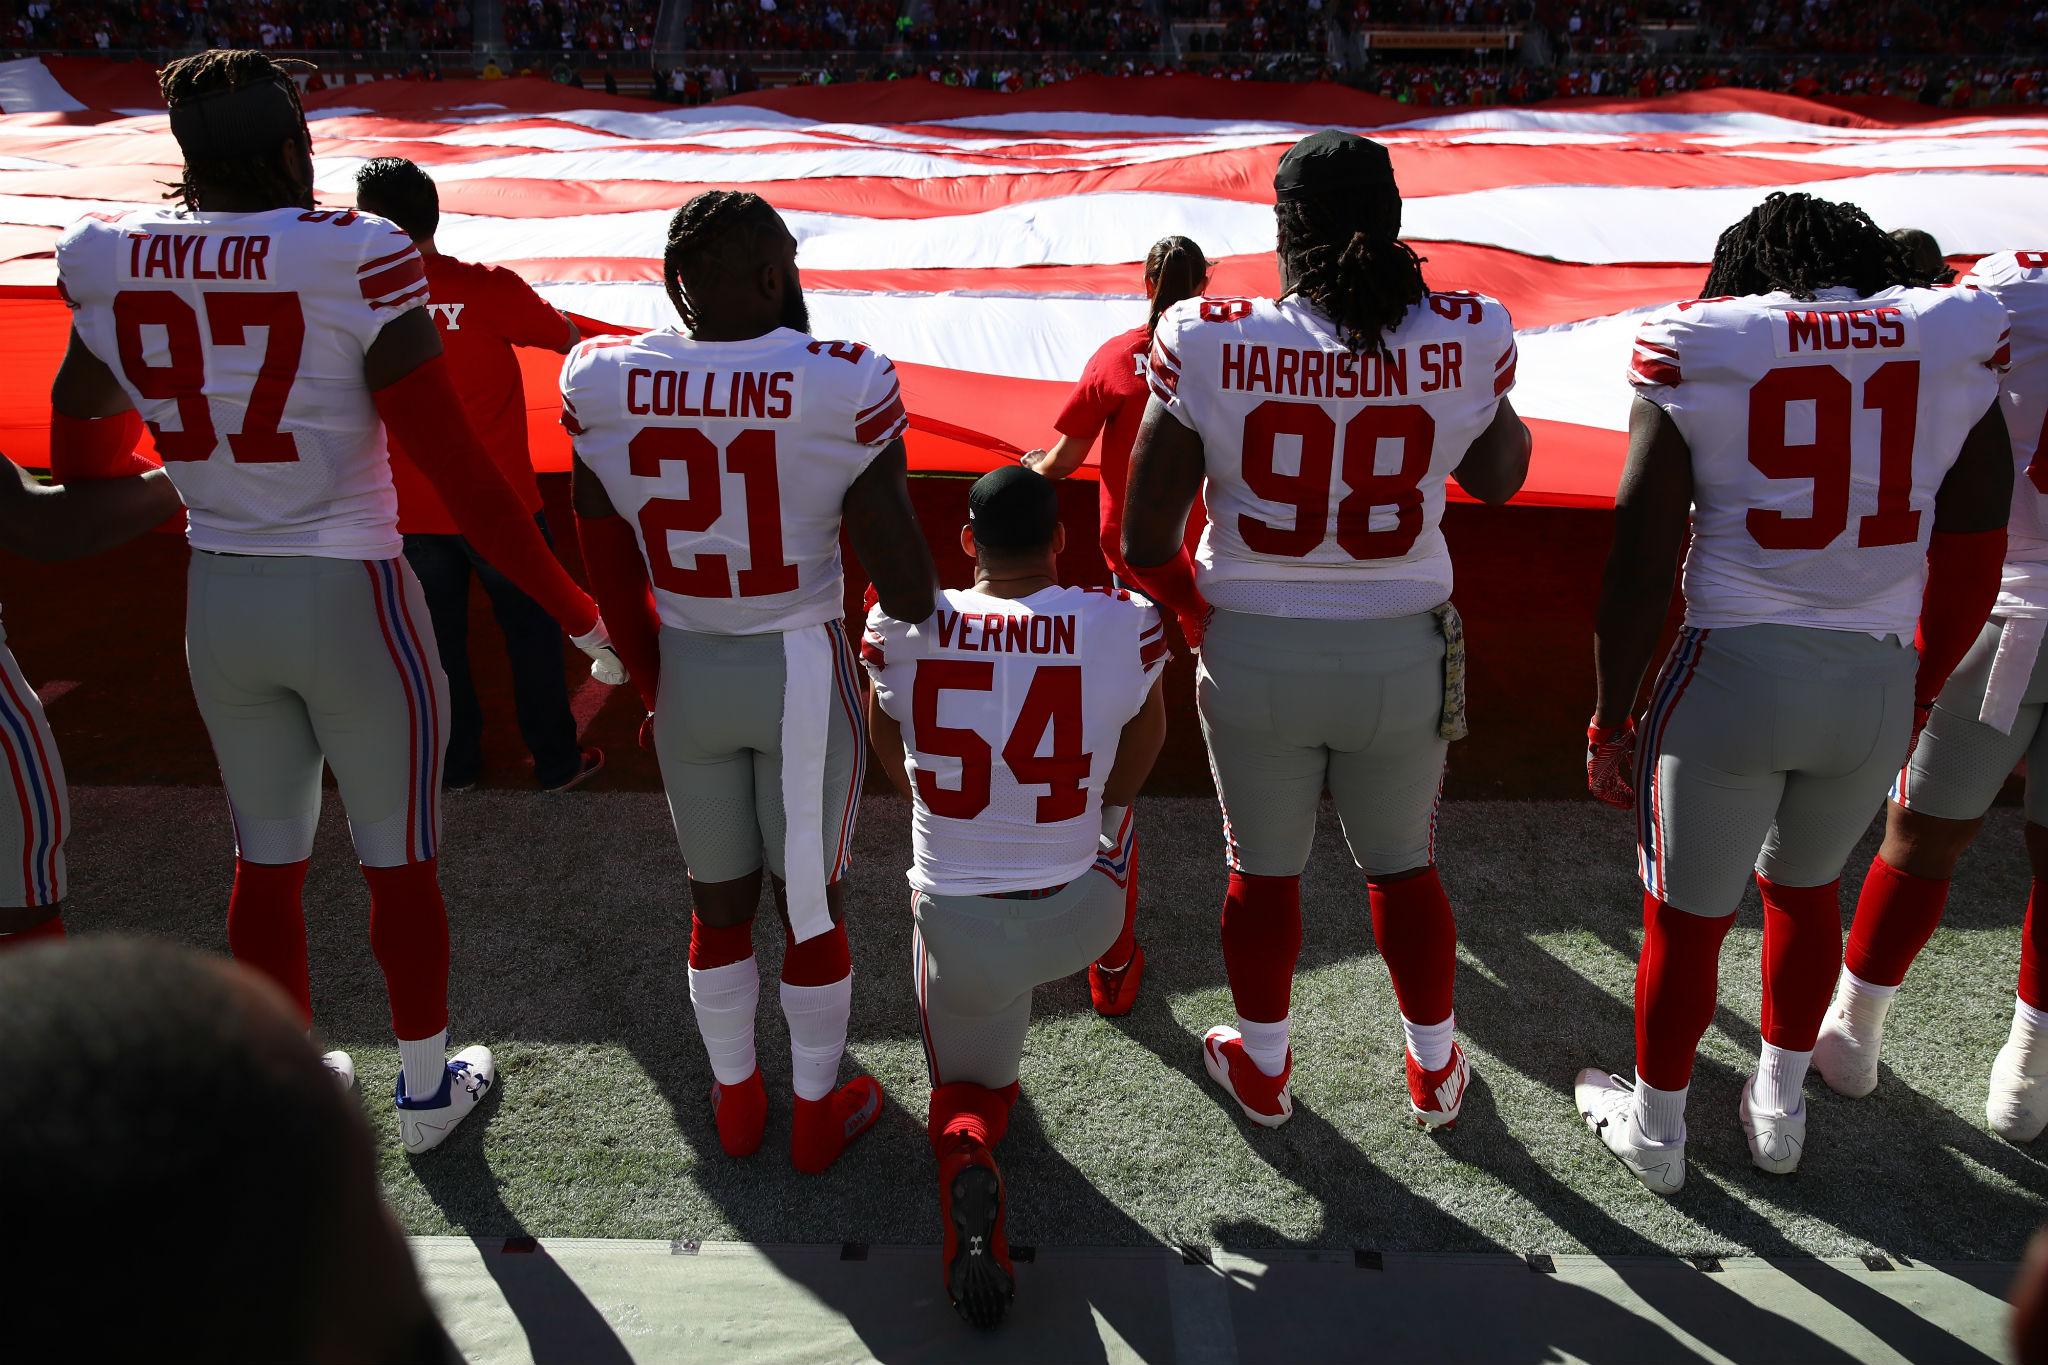 Olivier Vernon #54 of the New York Giants kneels during the national anthem (Photo by Ezra Shaw/Getty Images)